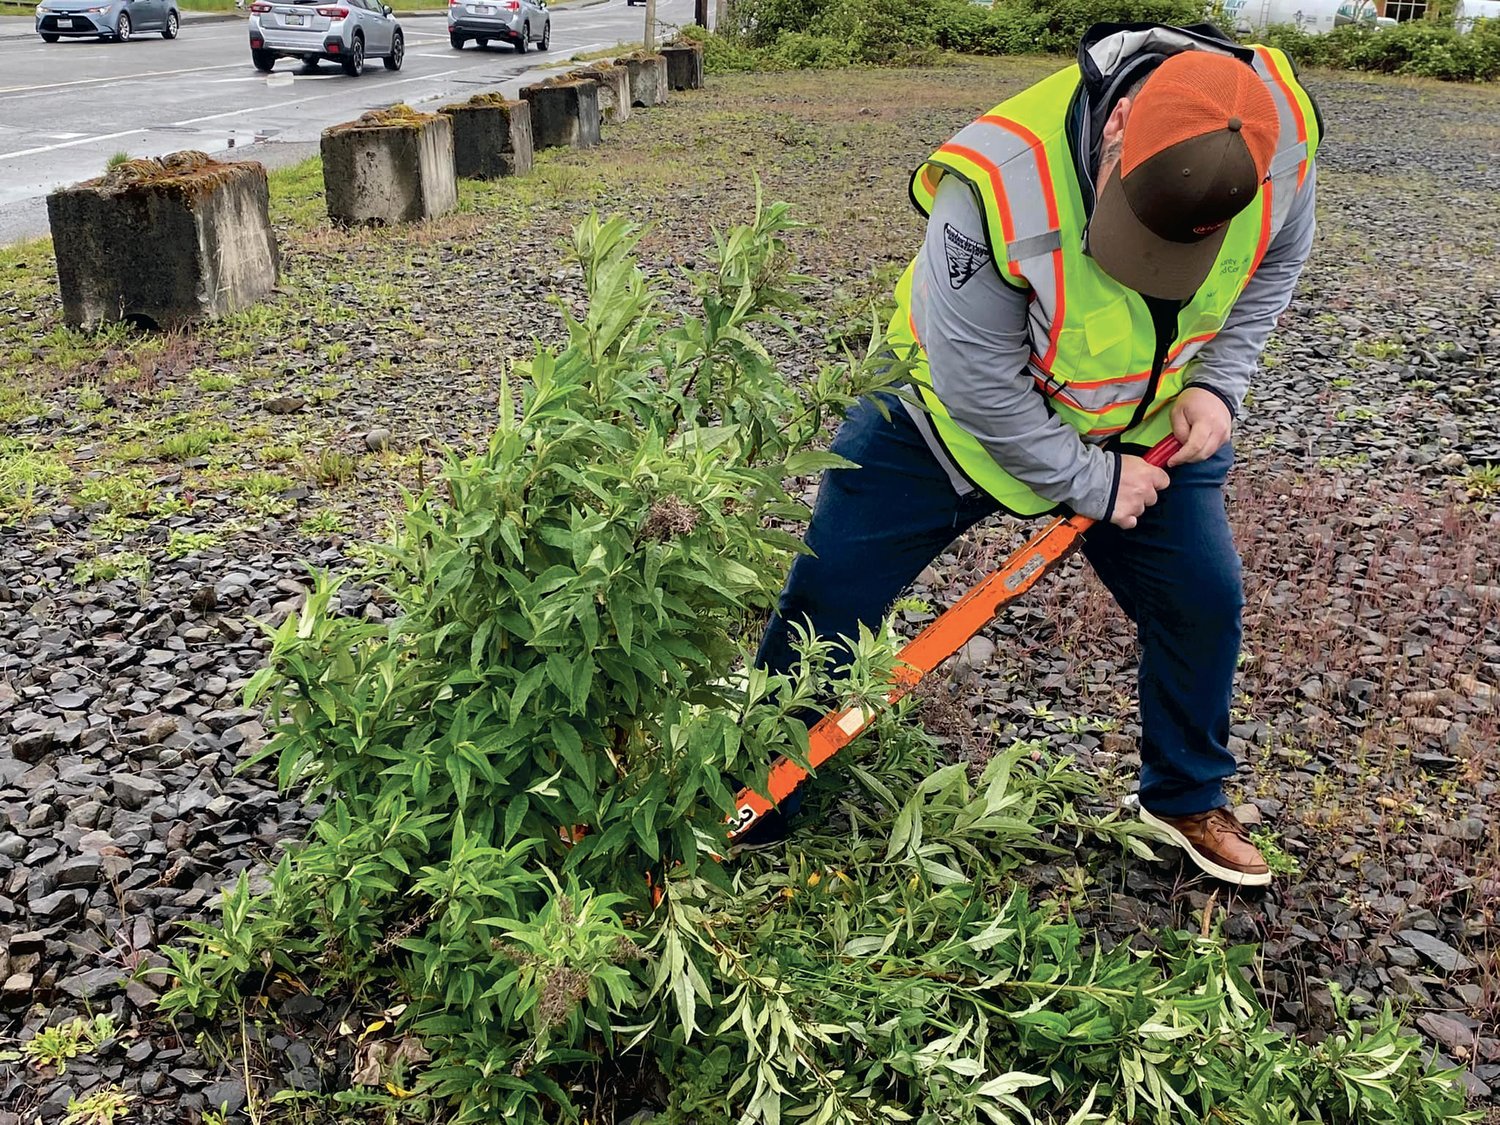 Lewis County Noxious Weed Control Board Program Coordinator Charles Edmonson uses a weed wrench to remove a large invasive weed by the roots.